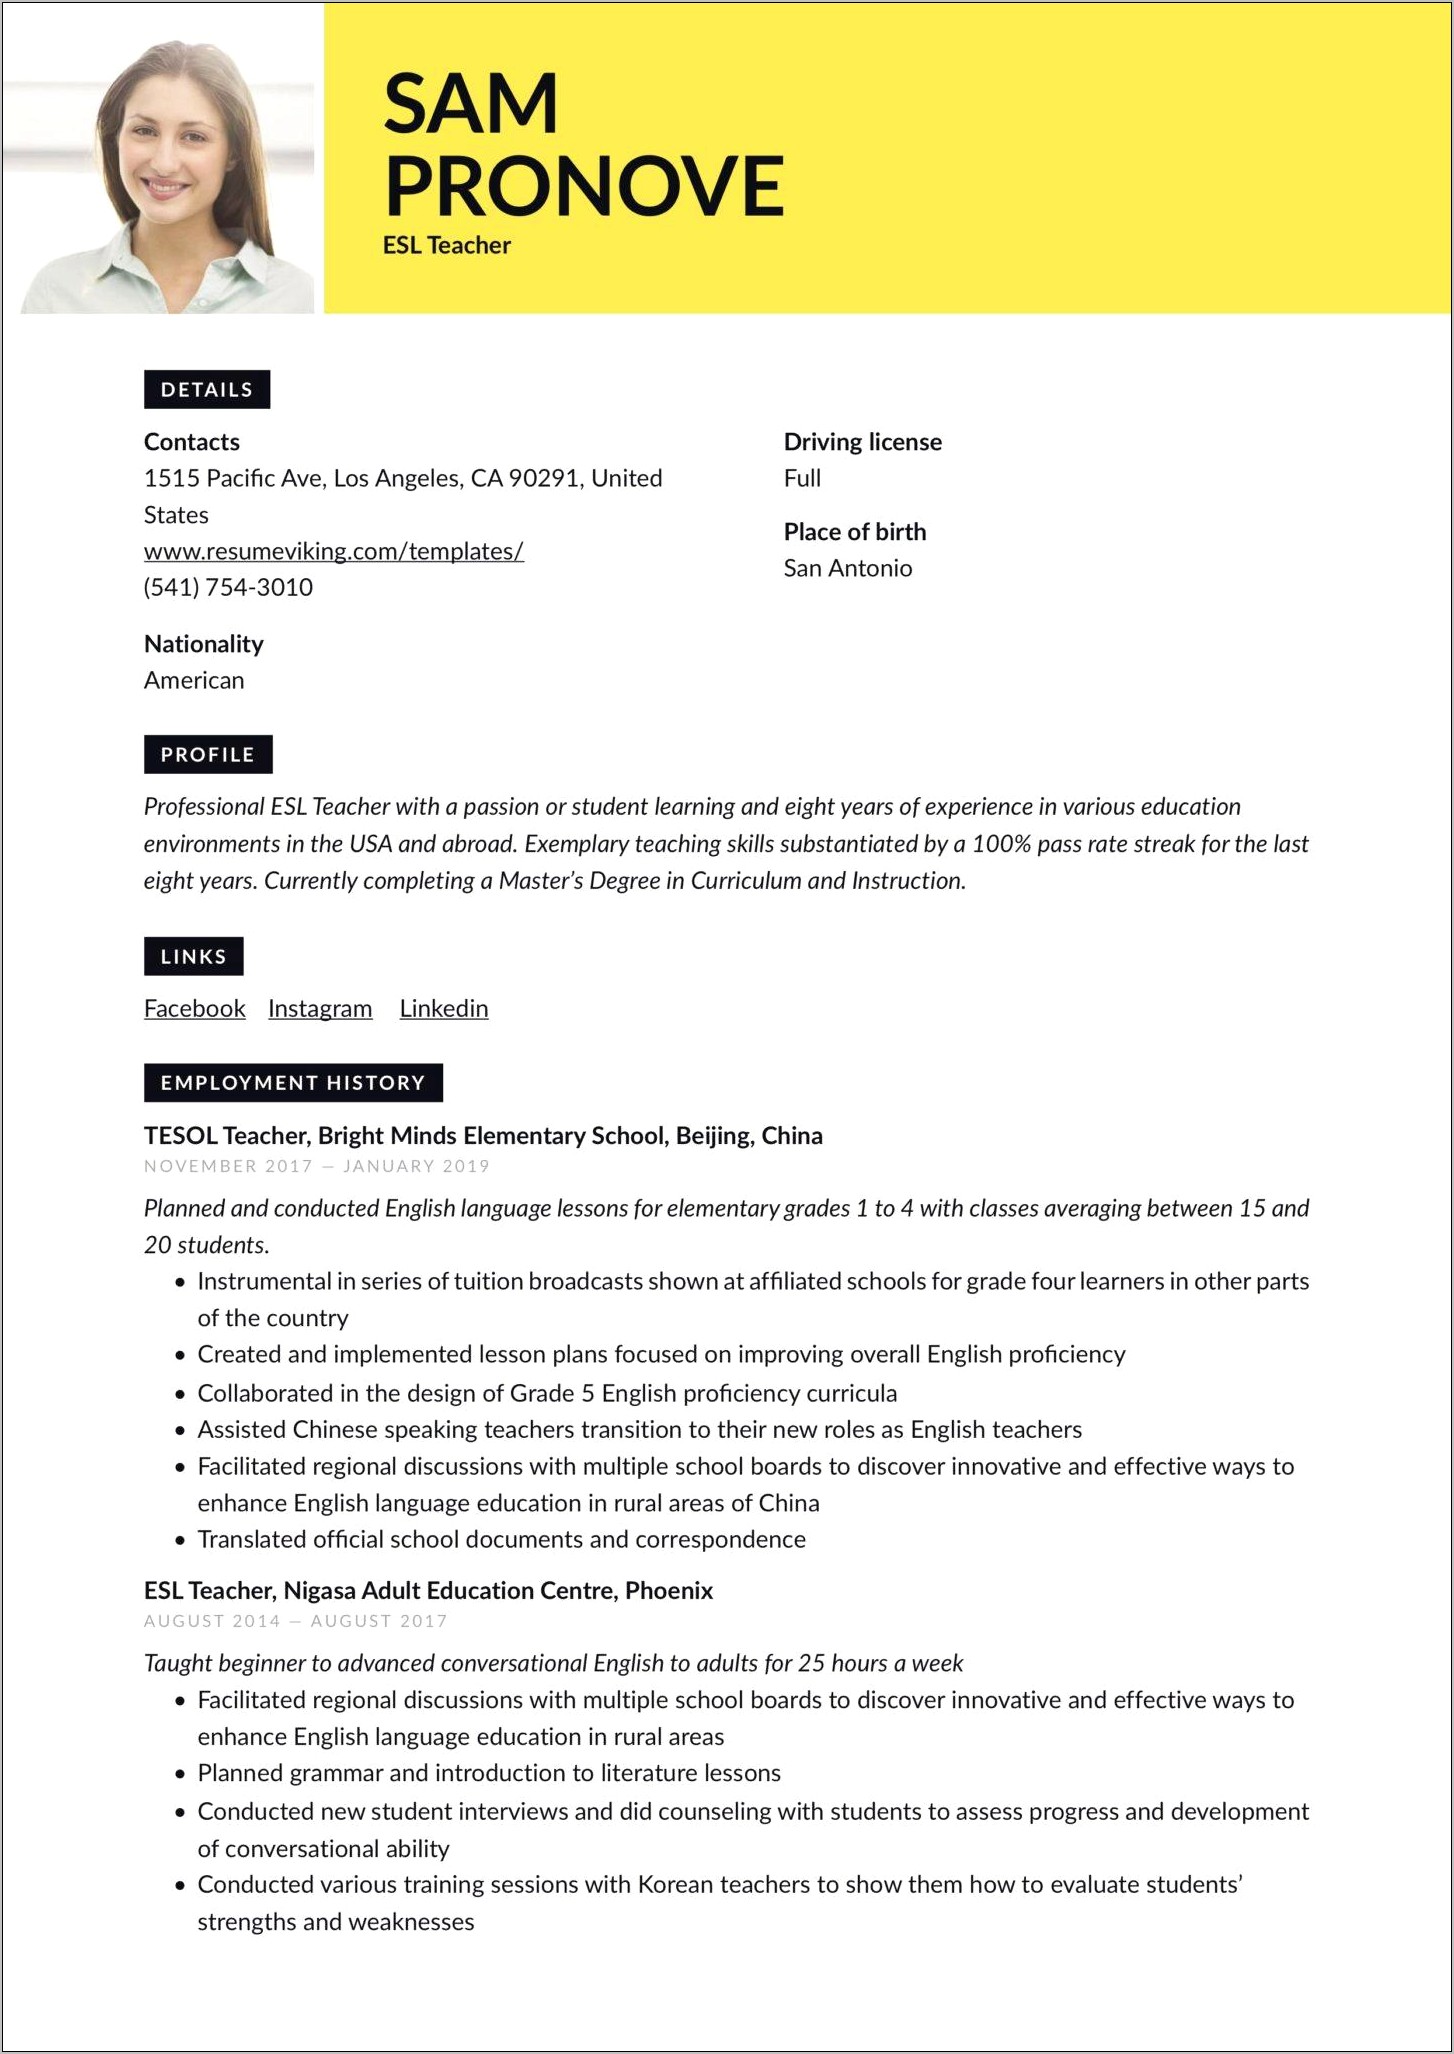 Philippine Resume Sample With No Experience